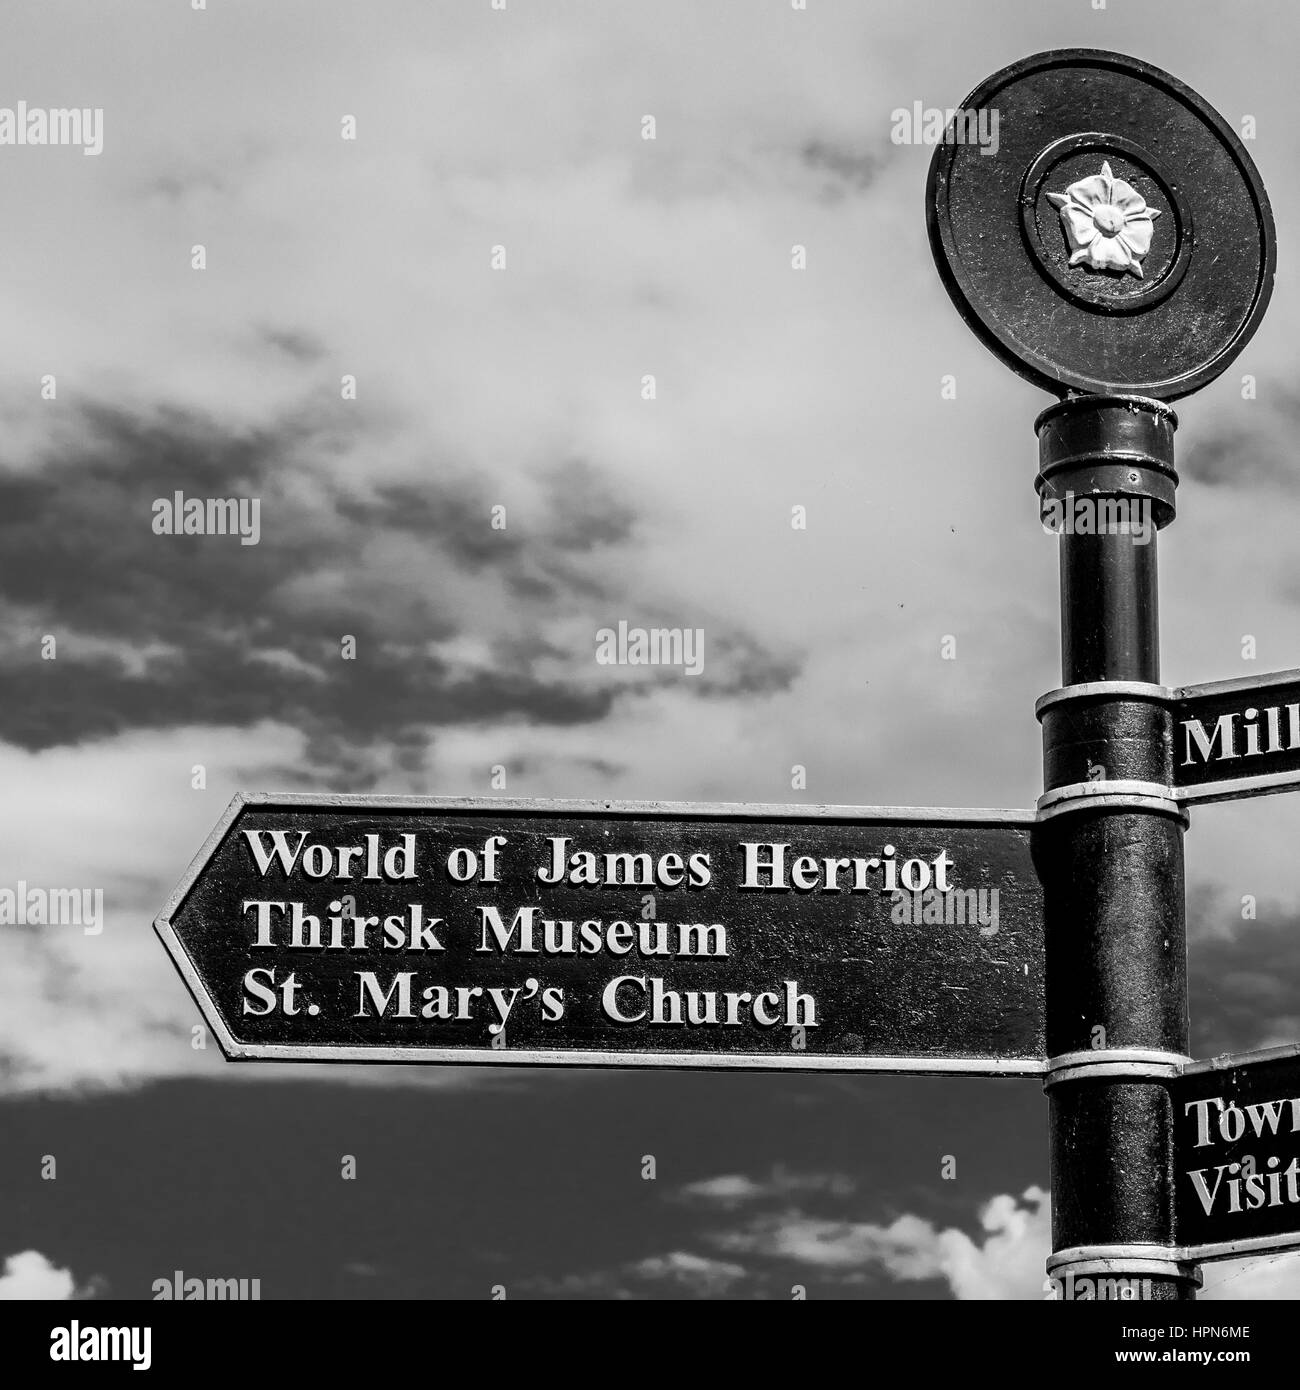 Signpost to World of James Herriot, Thirsk museum, and St. Mary's Church, Thirsk, North Yorkshire, UK. Stock Photo